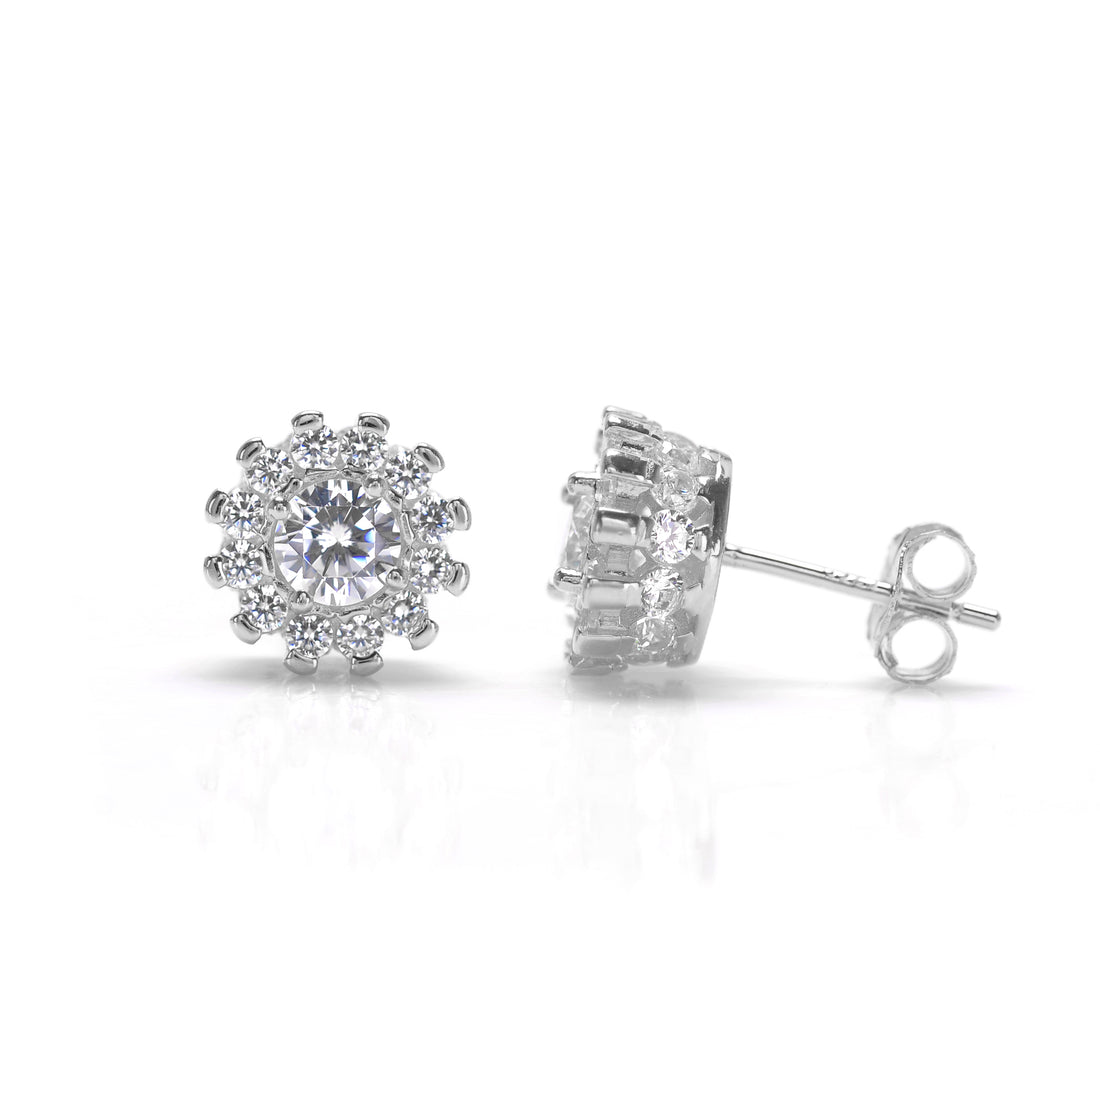 Exquisite Silver 925 Solitaire Stud Earrings - Affordable Luxury